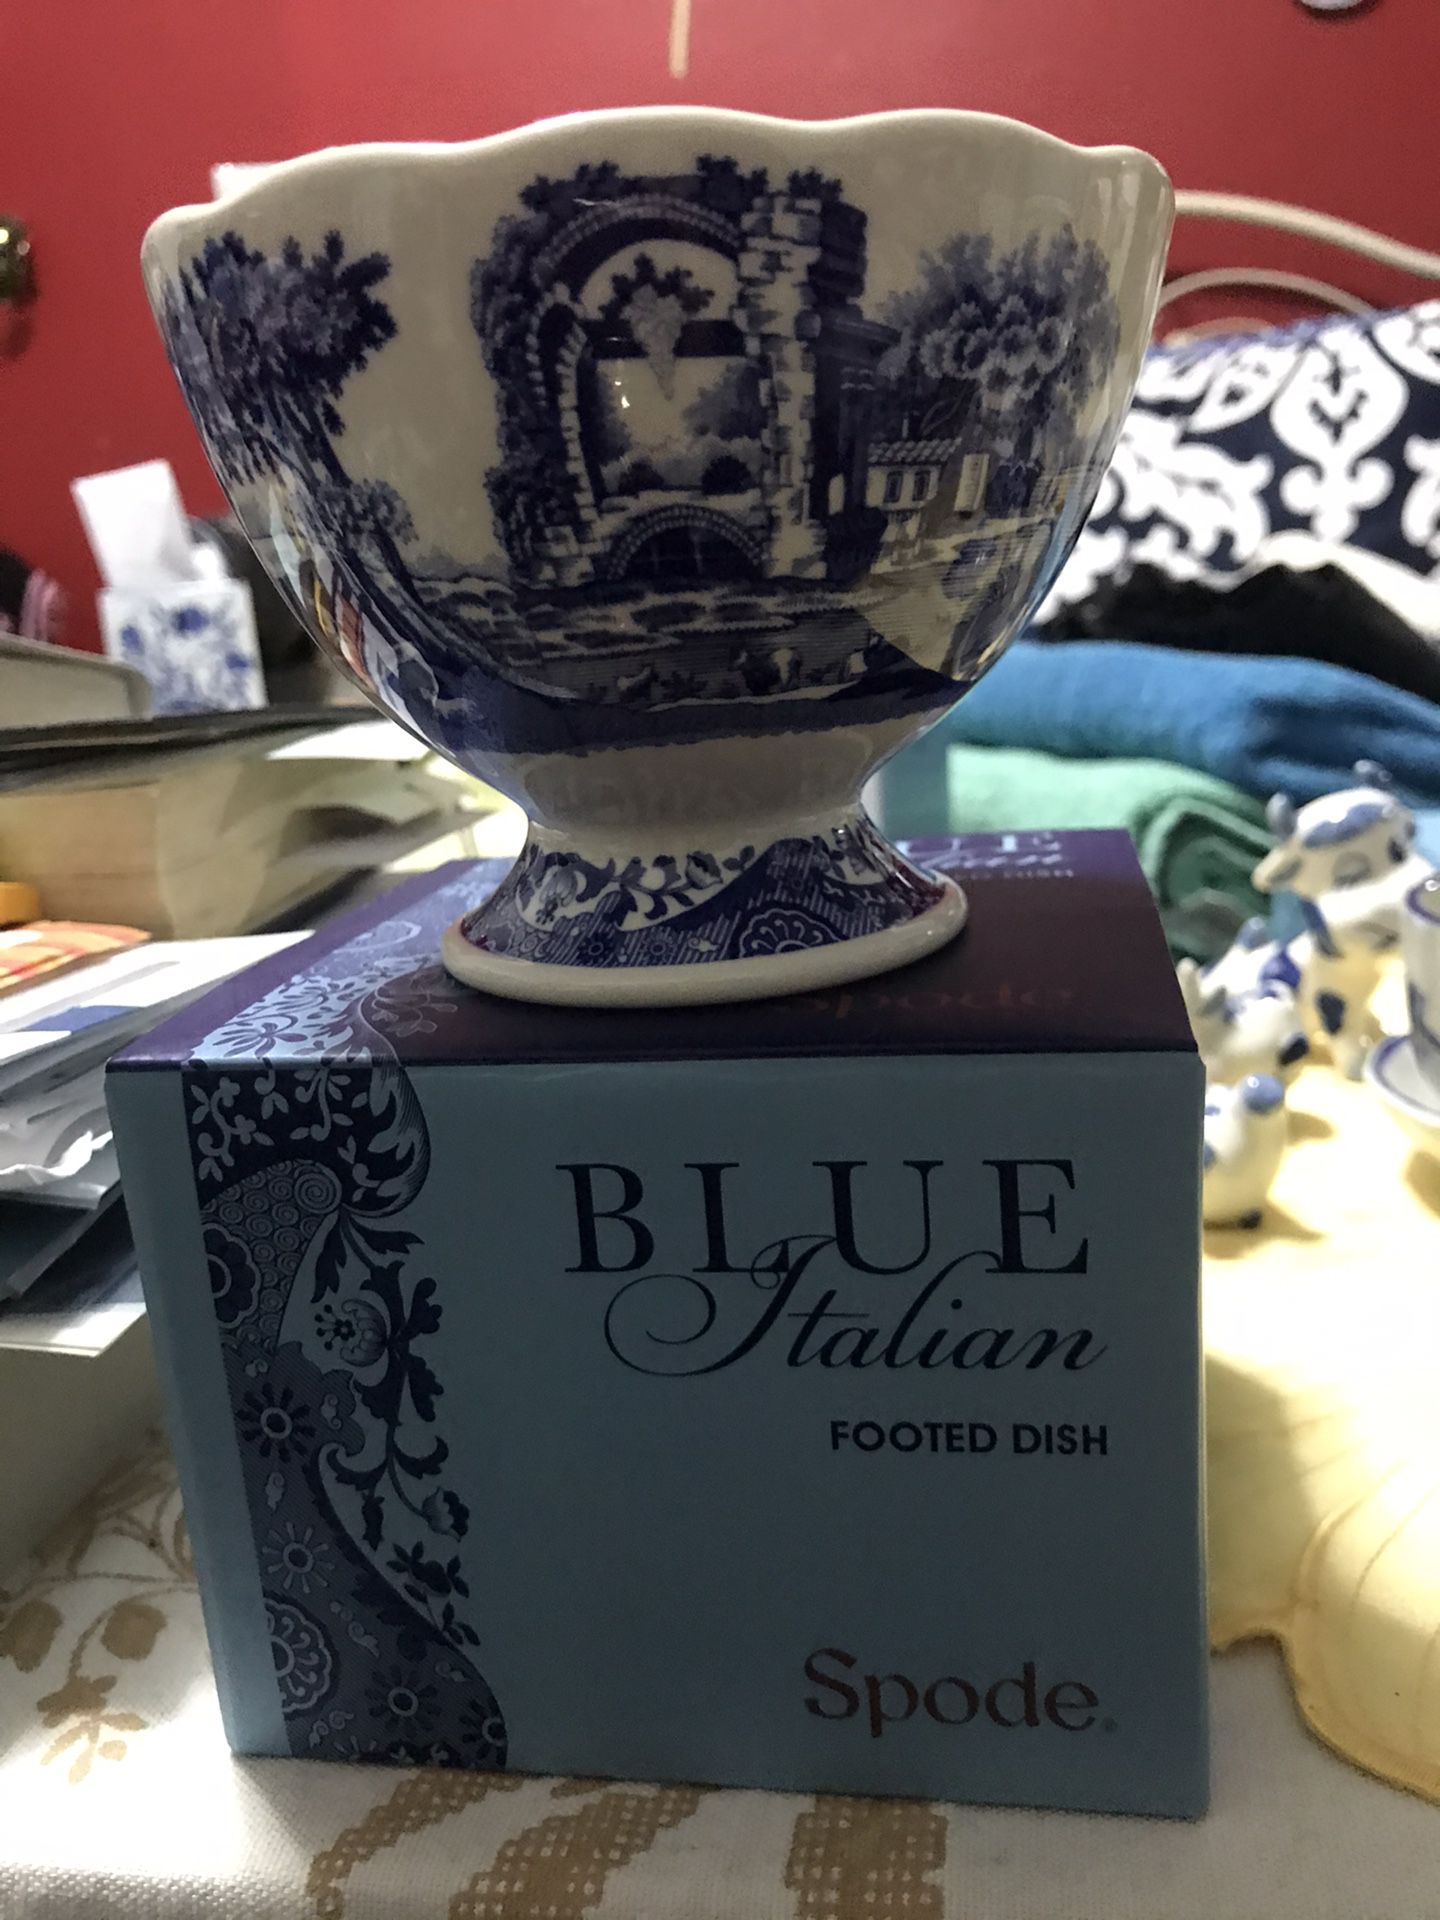 Spode Italian blue footed dish